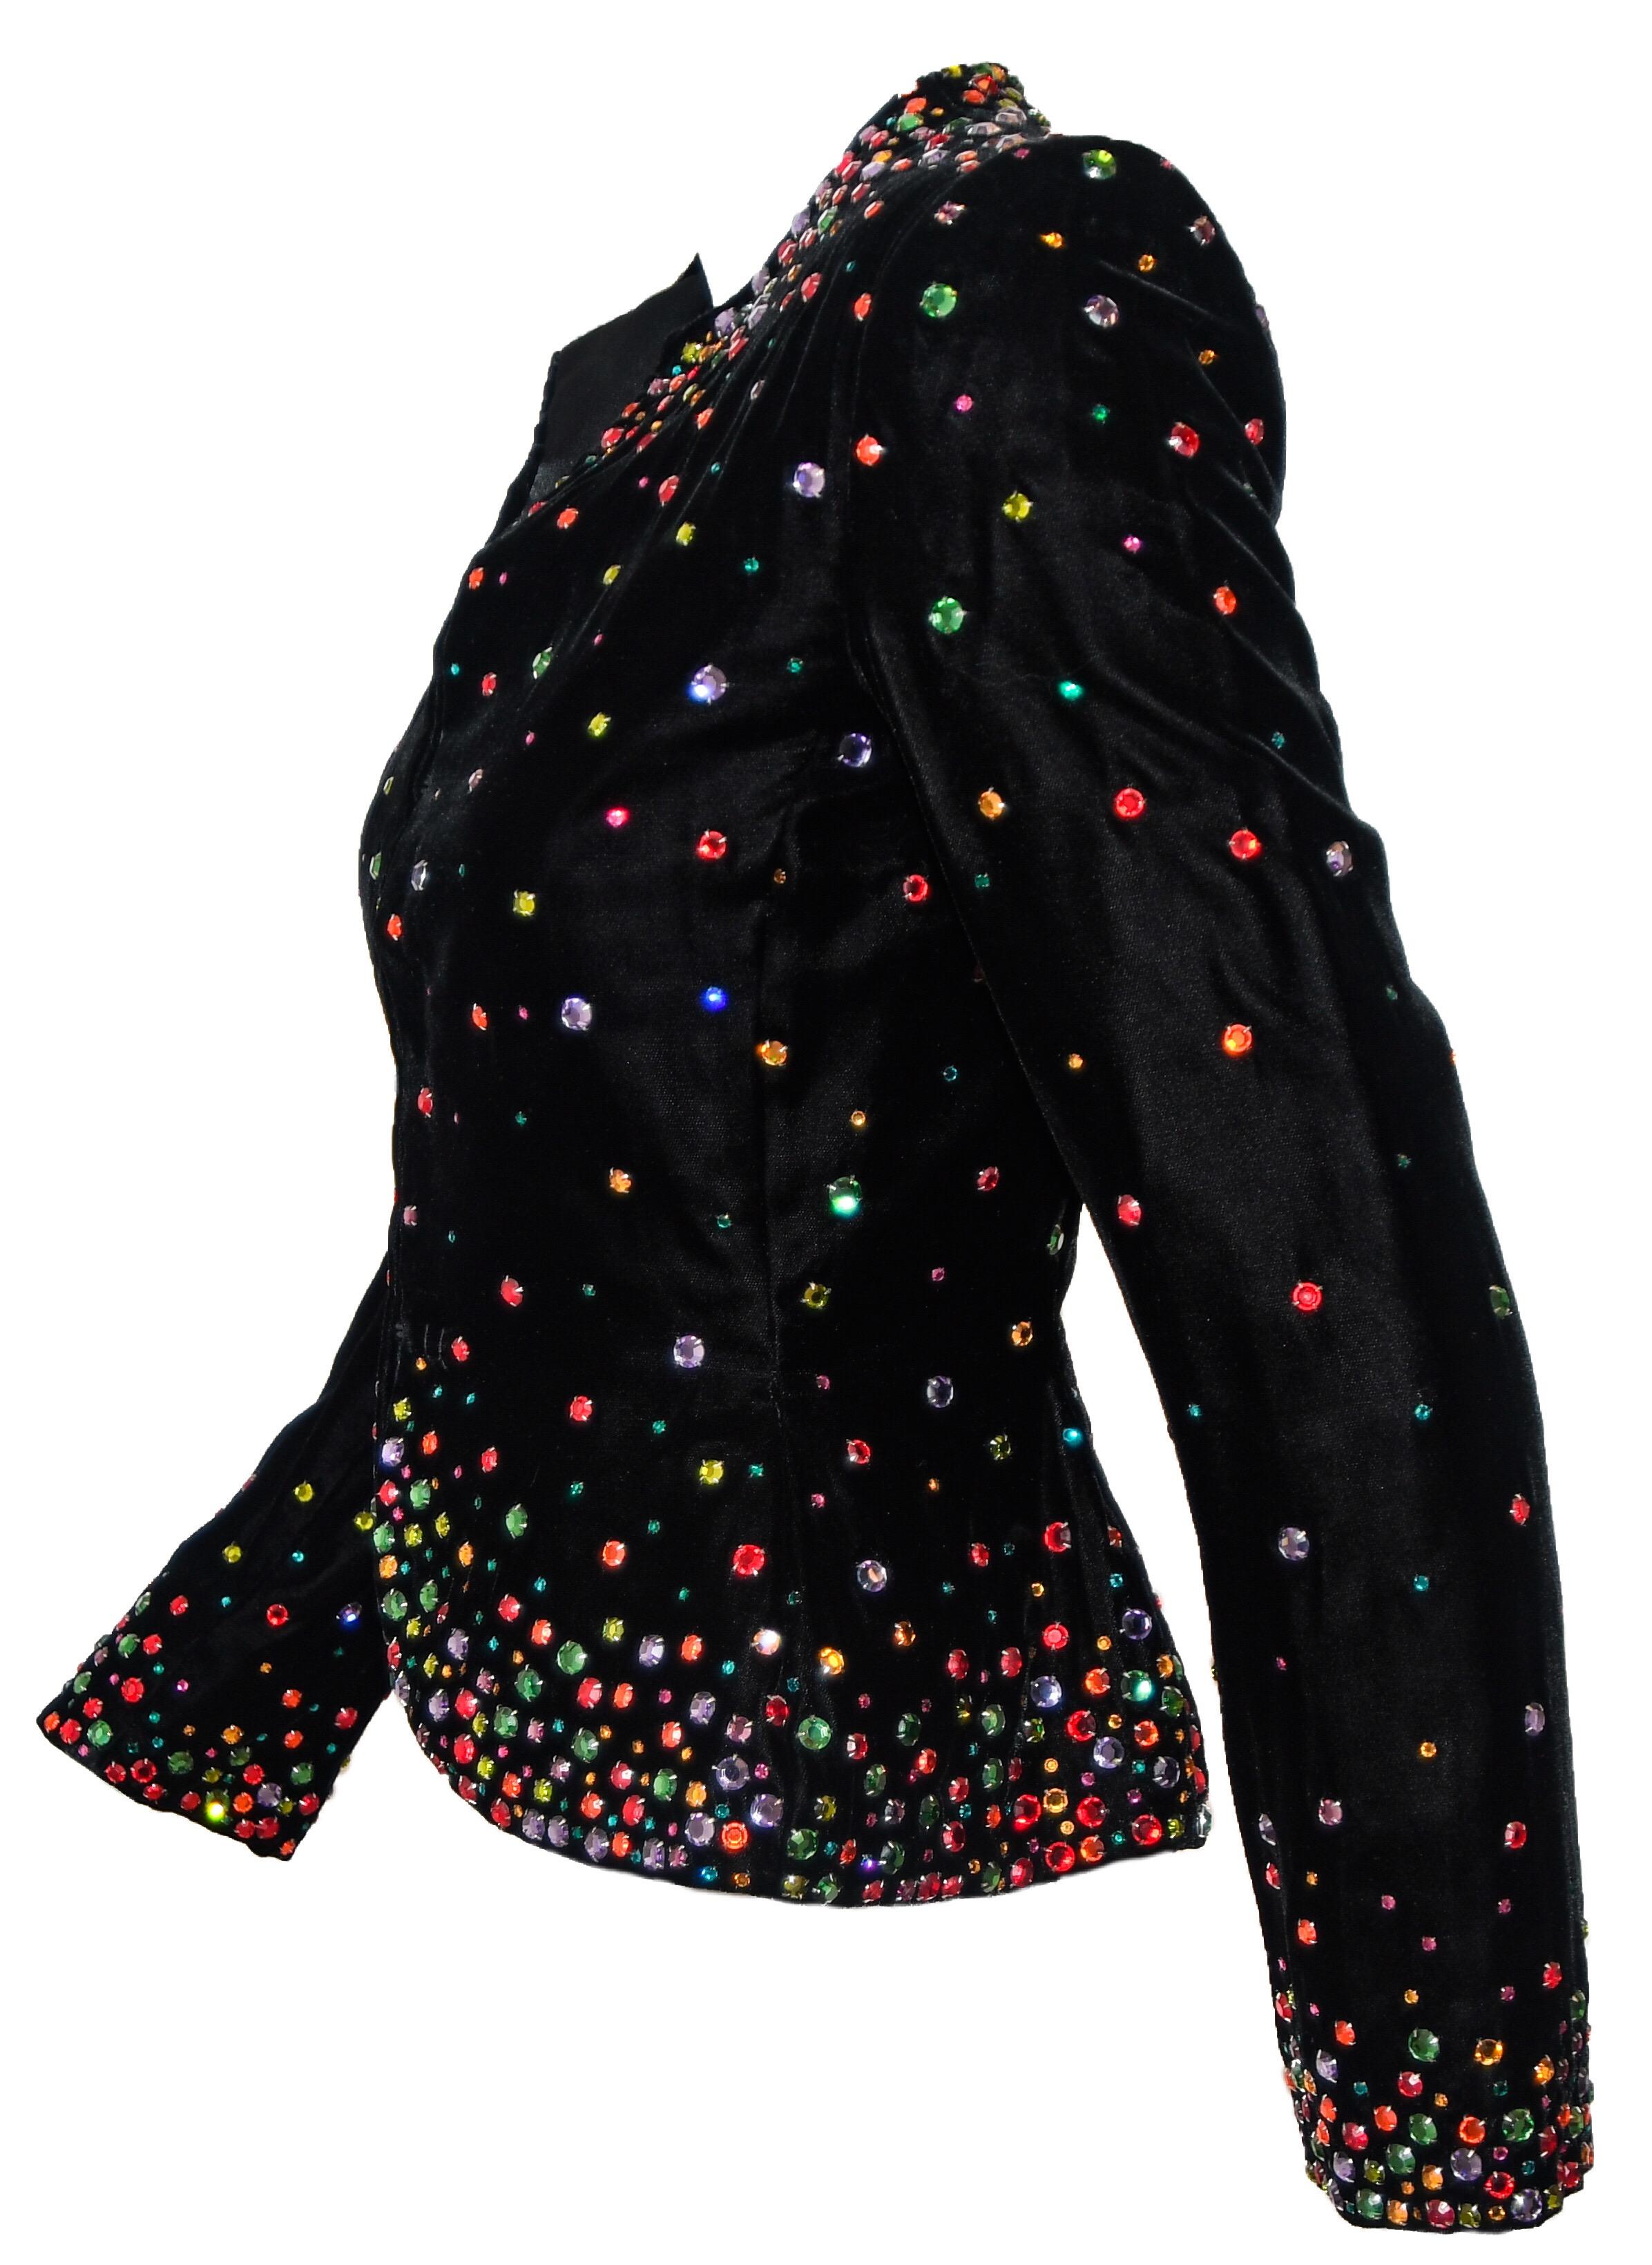 Bill Blass vintage black velvet tapered jacket incorporates hundreds of brilliant multicolored crystals throughout.  Each stone is set in prongs like the gems they represent!  This garment is accentuated with fuller coverage of the crystals around